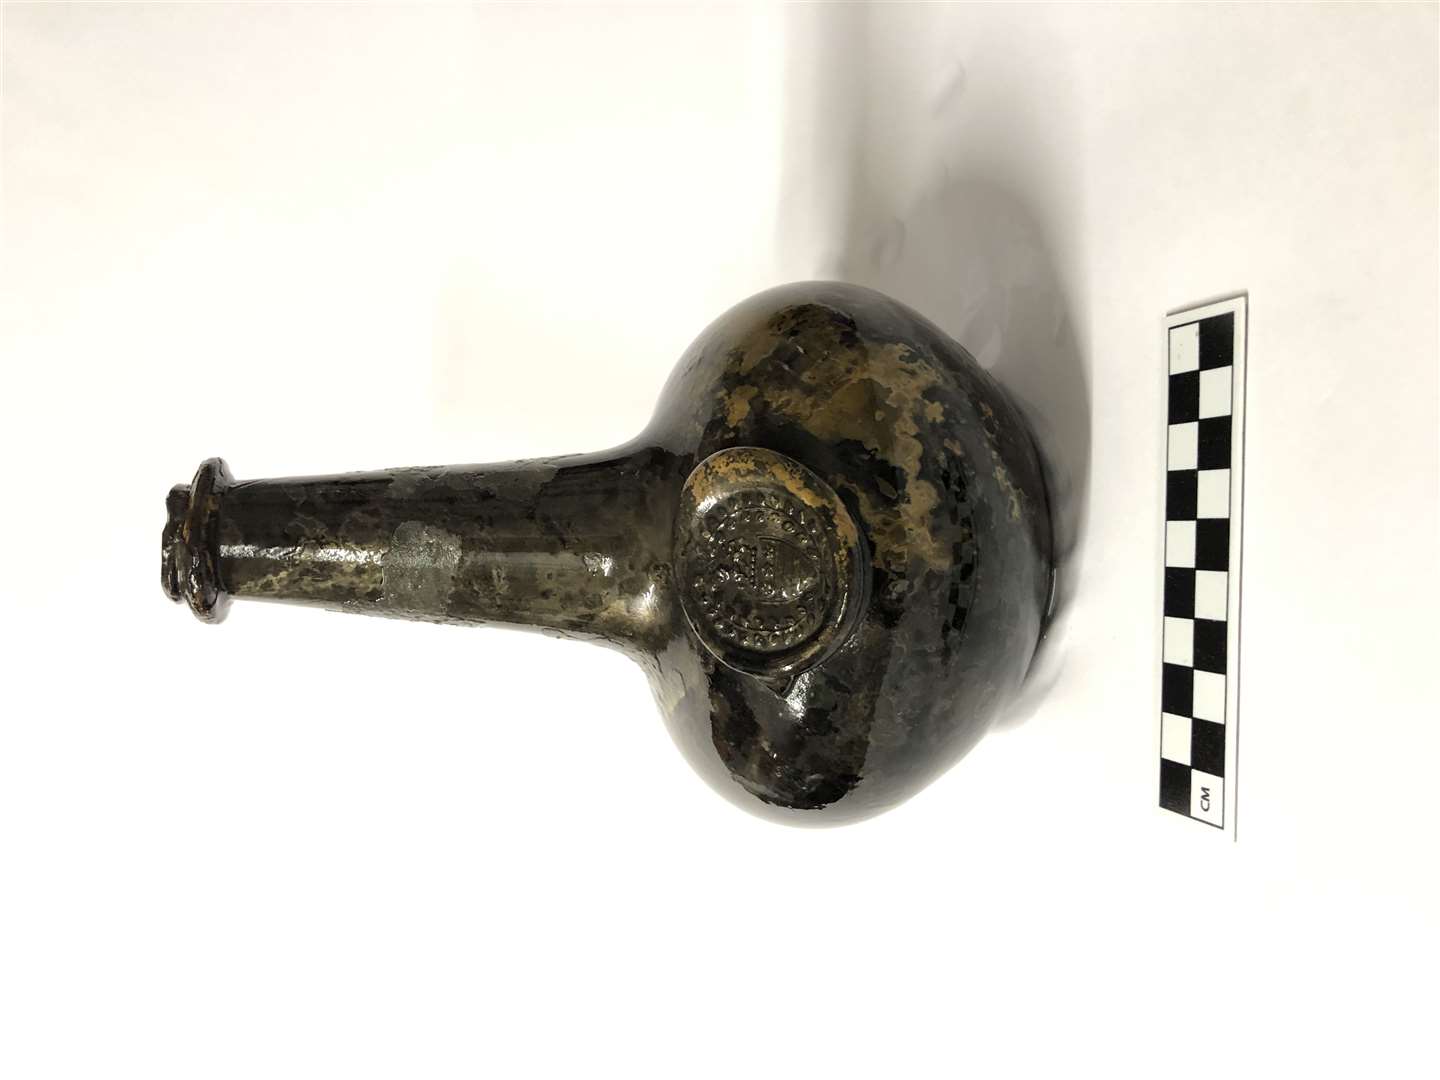 One of the bottles found with the wreck bears a glass seal with the crest of the Legge family – ancestors of George Washington, the first US President (Norfolk Historic Shipwrecks/PA)